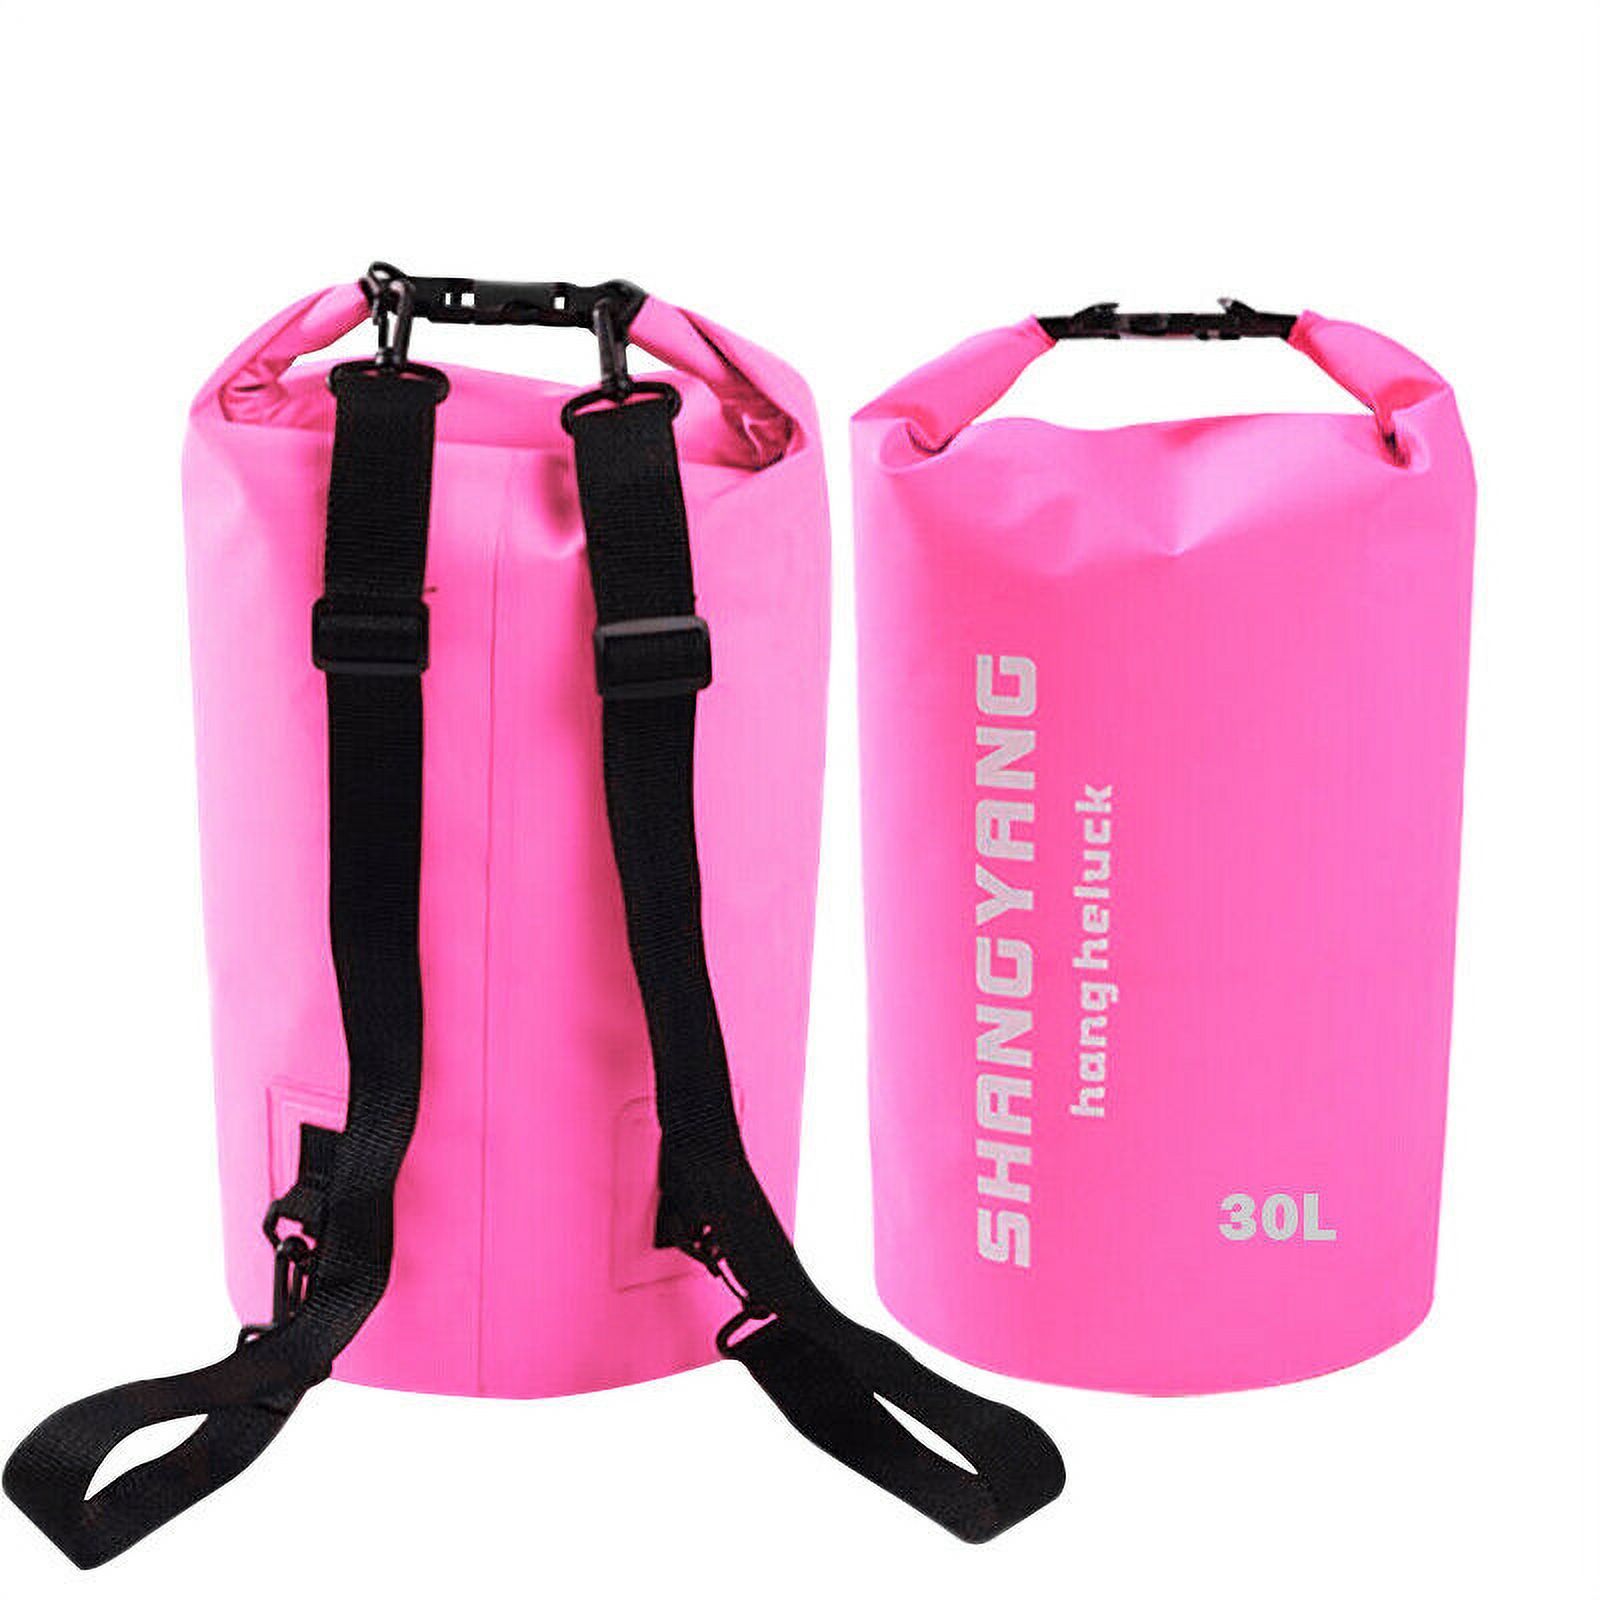 Waterproof Dry Bag - Soatuto Water Resistant Roll Top Dry Compression Sack Keeps Gear Dry for Kayaking, Beach, Rafting, Boating, Hiking, Camping and Fishing Waterproof Dry Bag - 30L / Pink - image 1 of 7